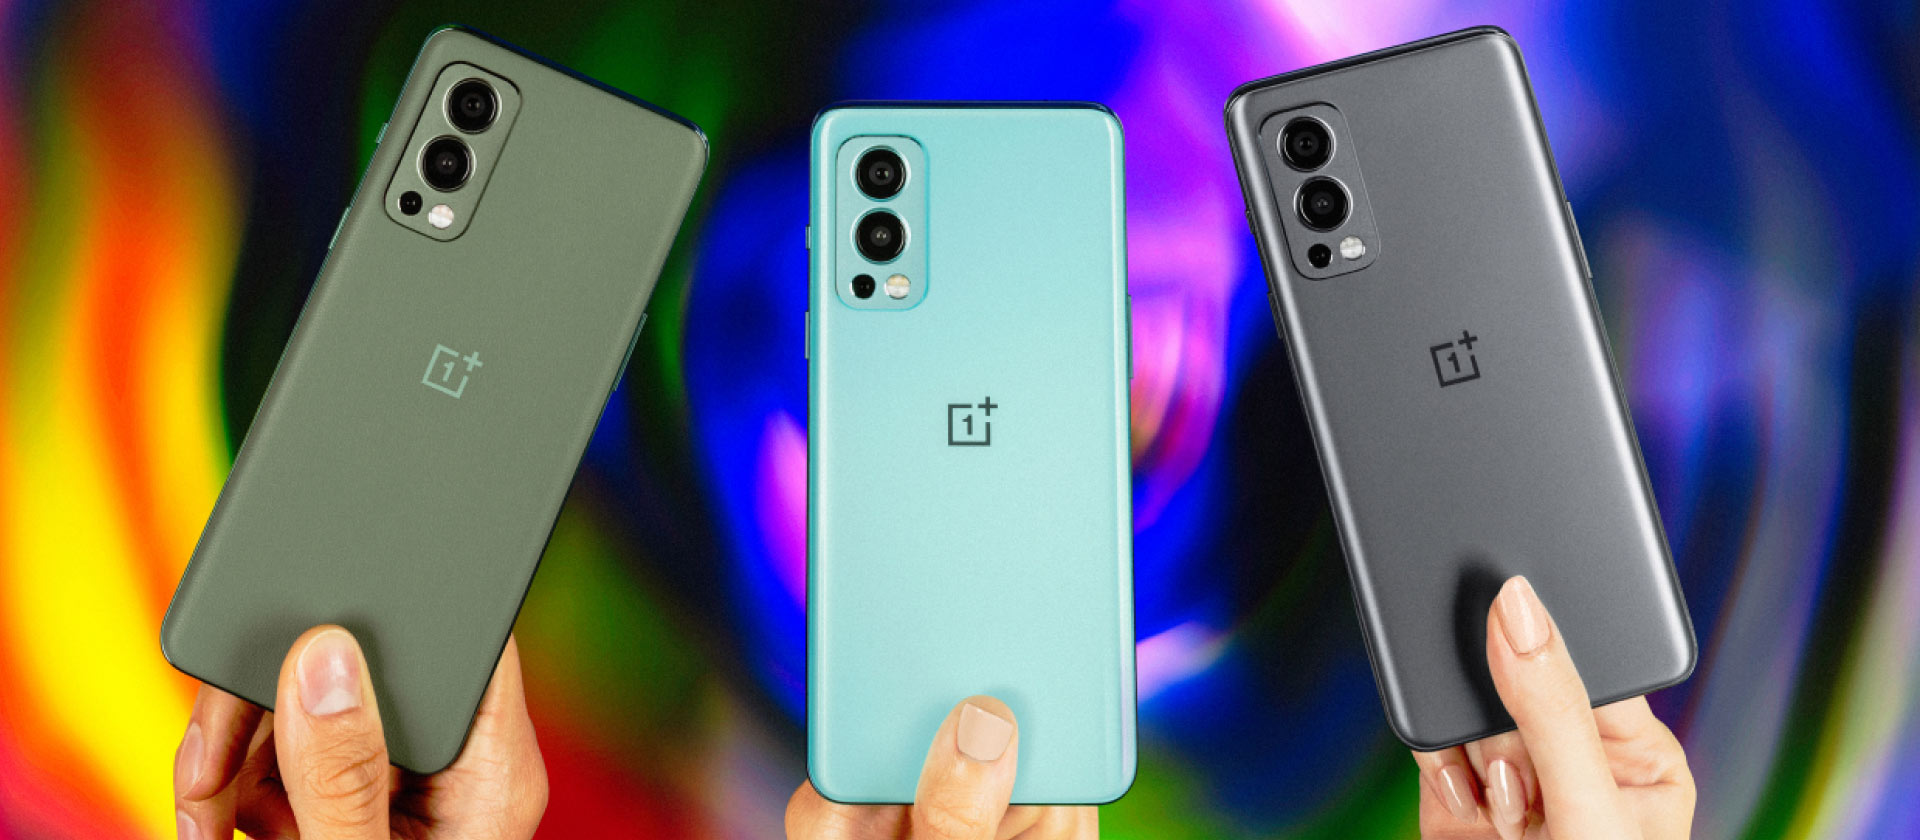 OnePlus Nord 2 debuted with MediaTek Dimensity 1200 SoC and 50MP triple rear camera setup: Specs, Price